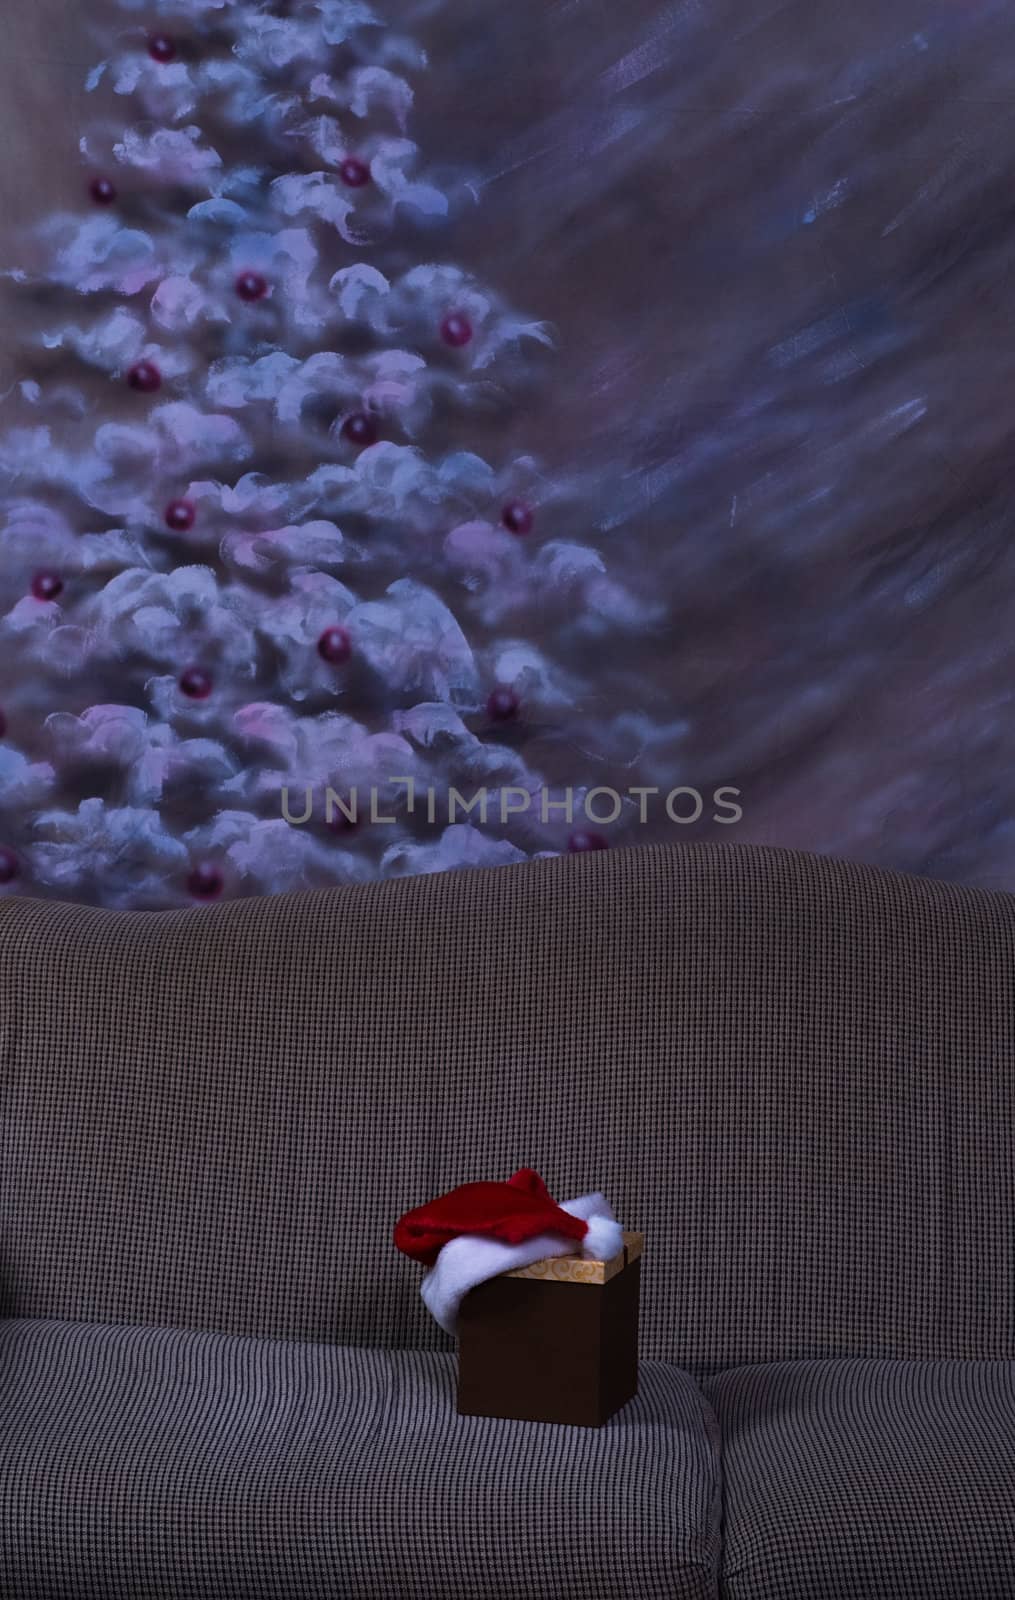 A Christmas giftbox with a santa hat on it, shot with a hue to show it is in the dark or at night